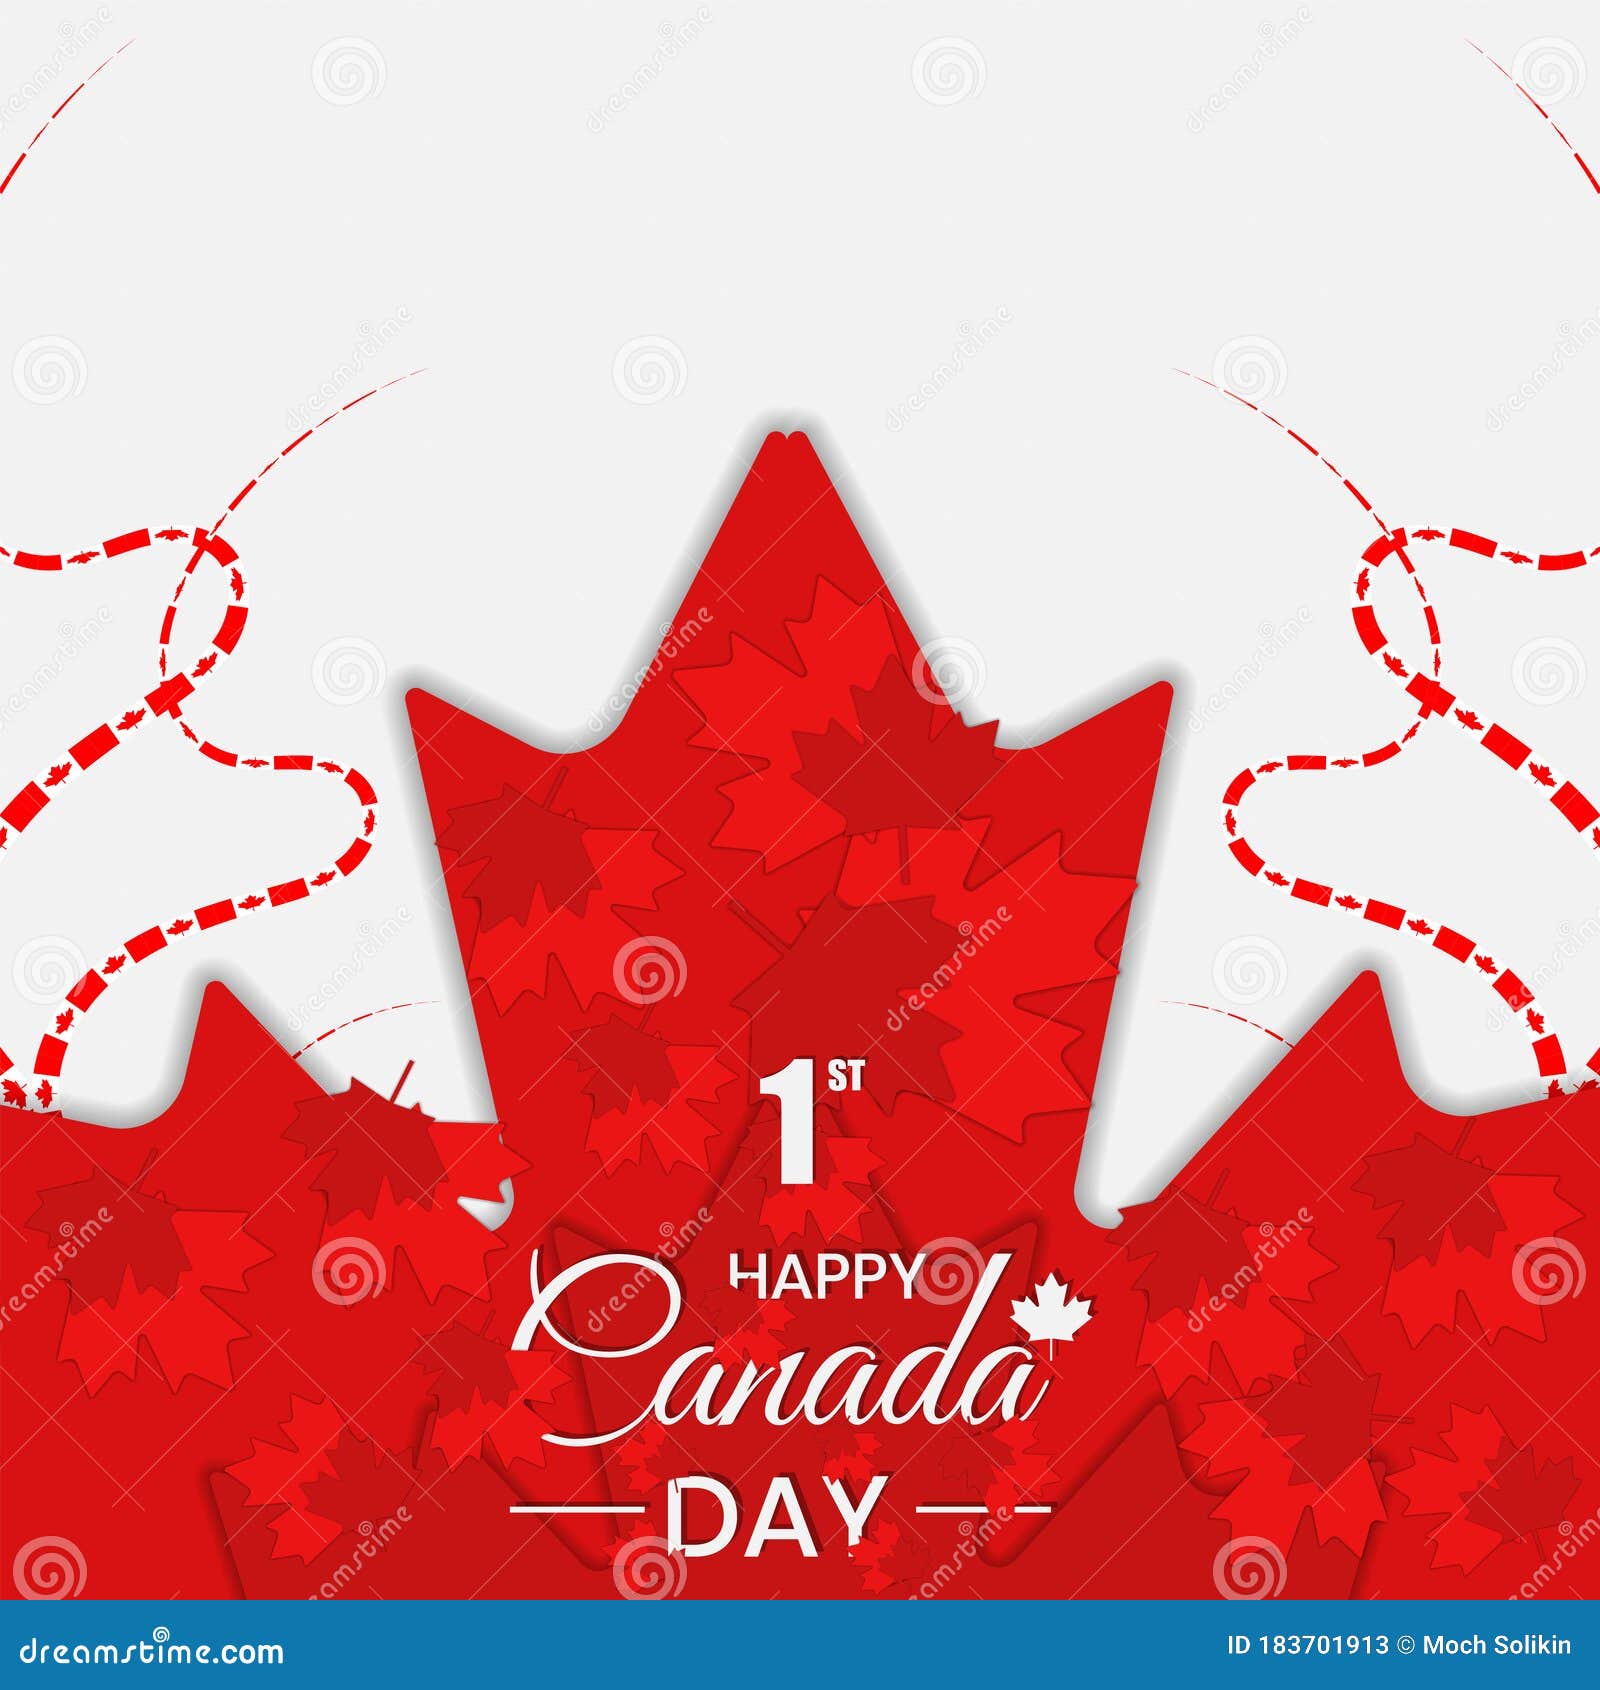 Canada Day Background With Red Maple Leaf Stock Vector - Illustration ...